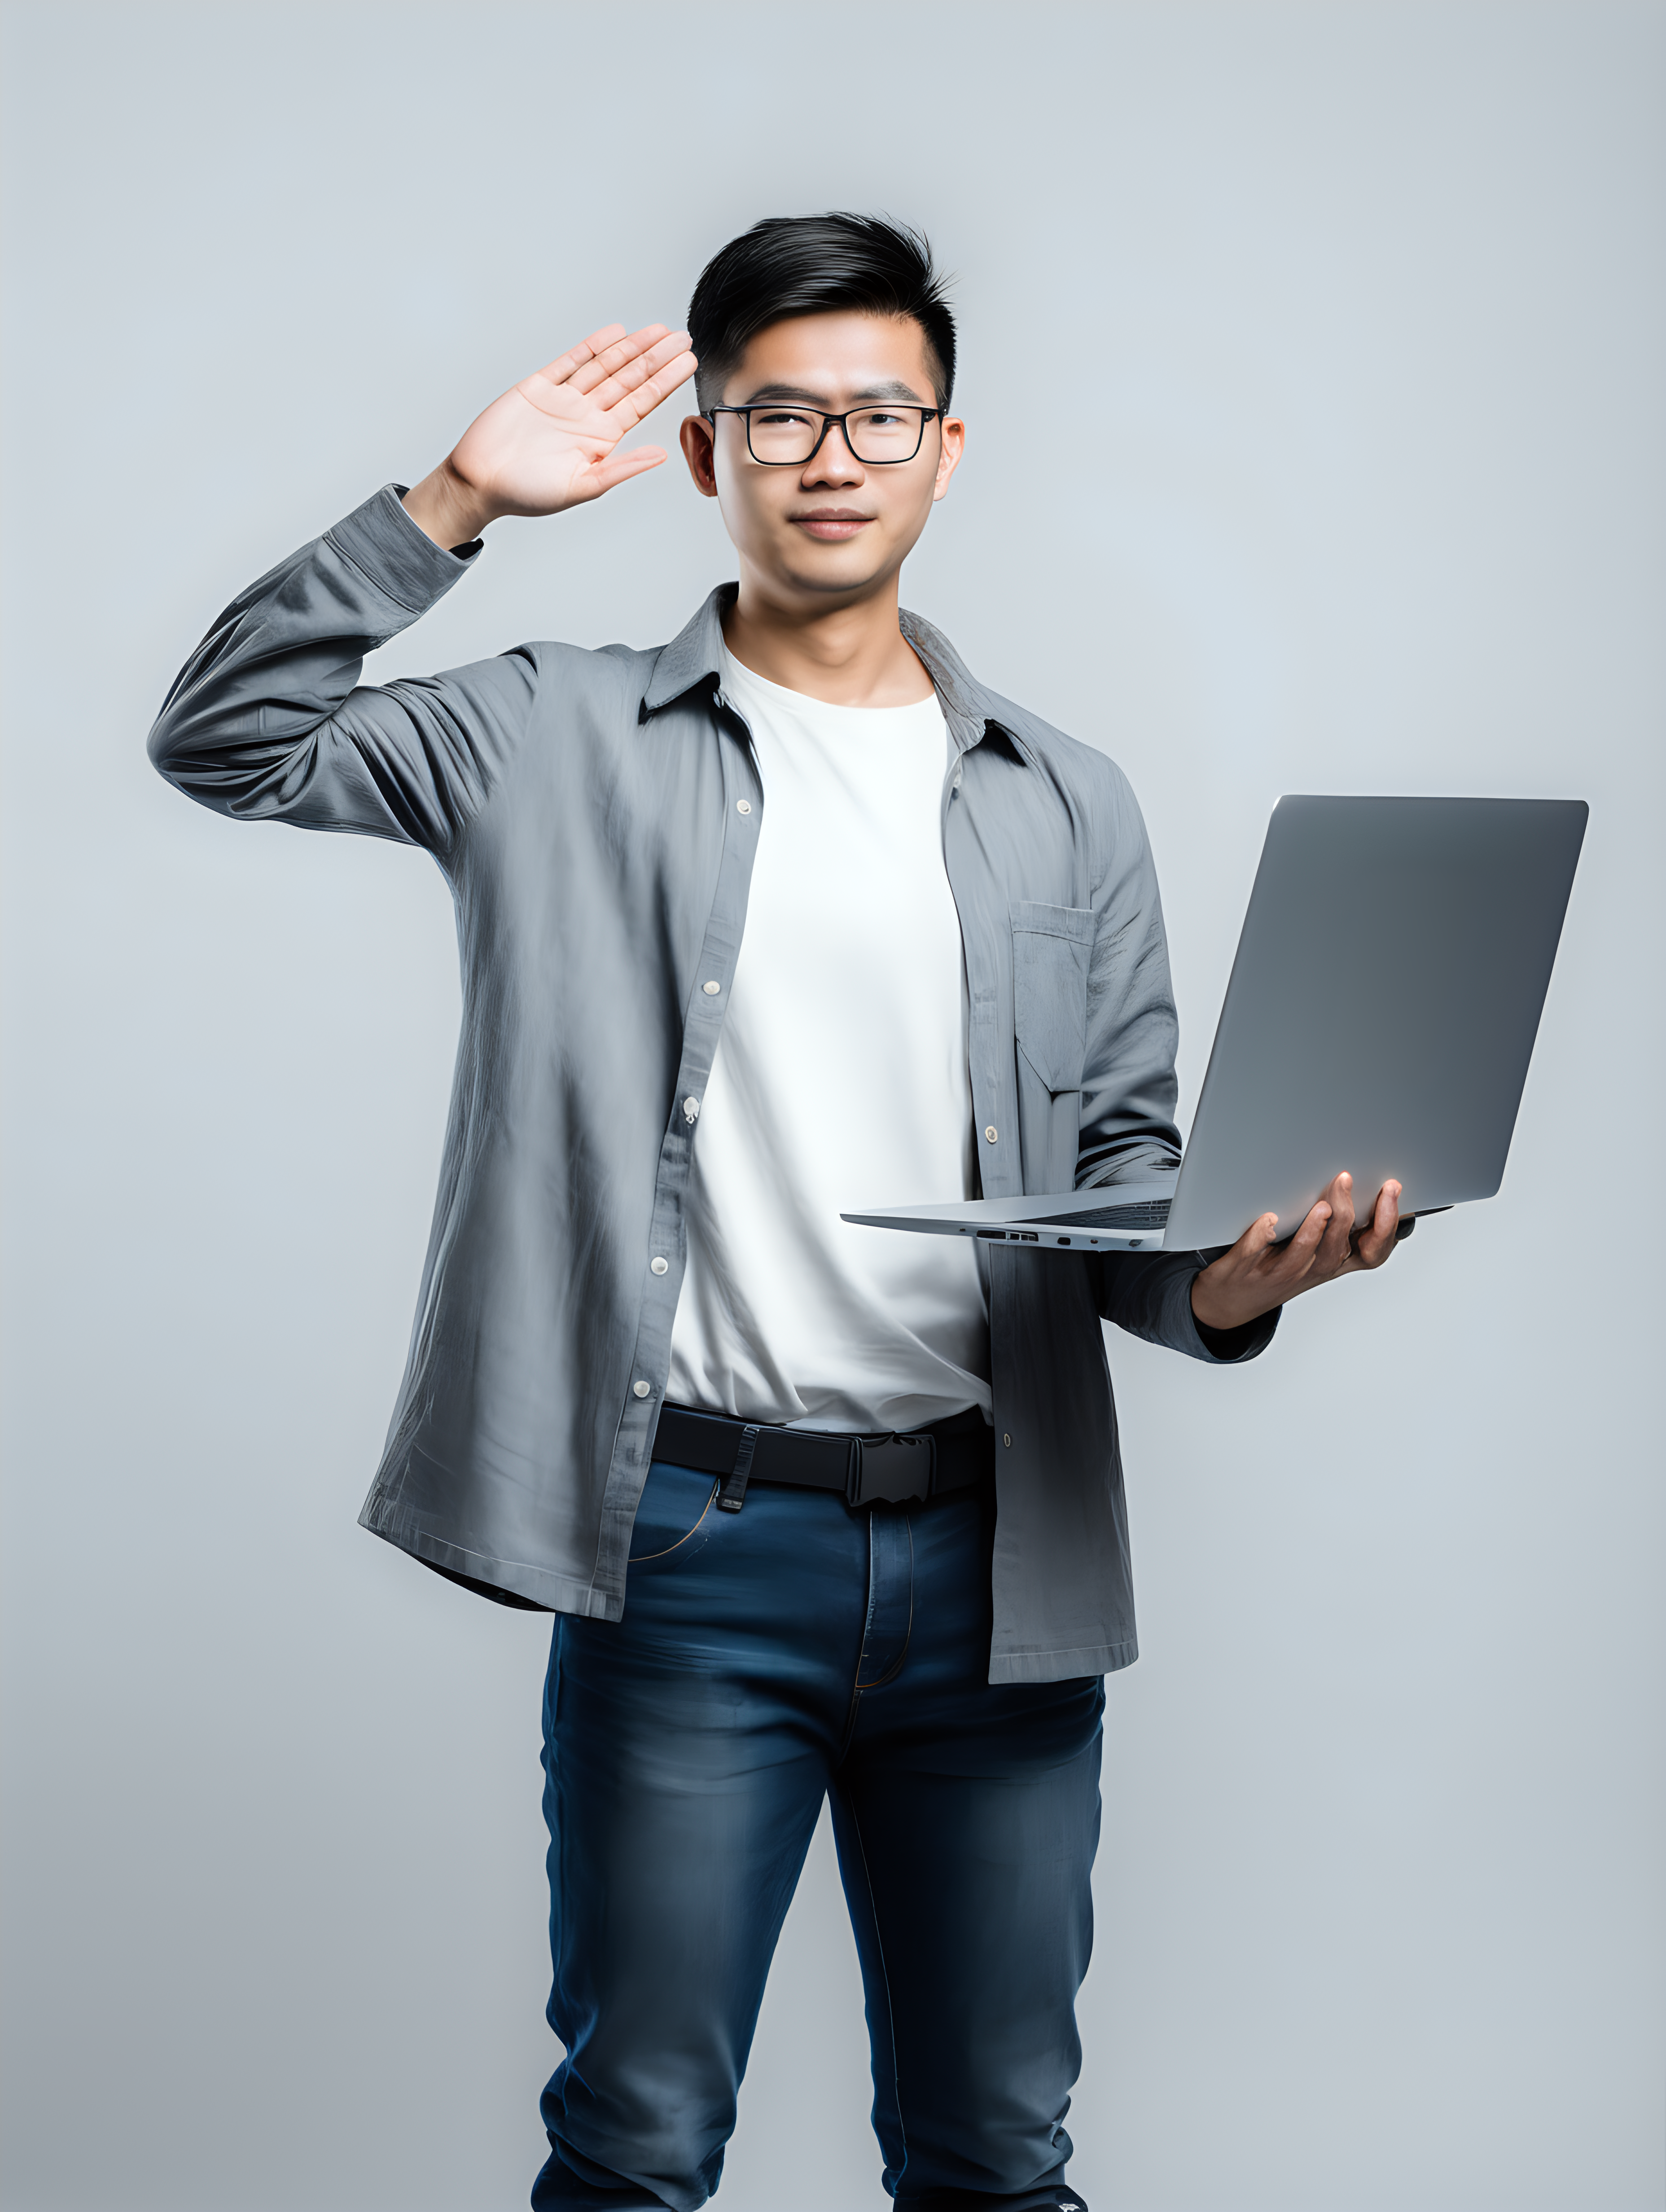 Asian Software developer standing to attention and saluting with one hand holding his laptop under the other arm
